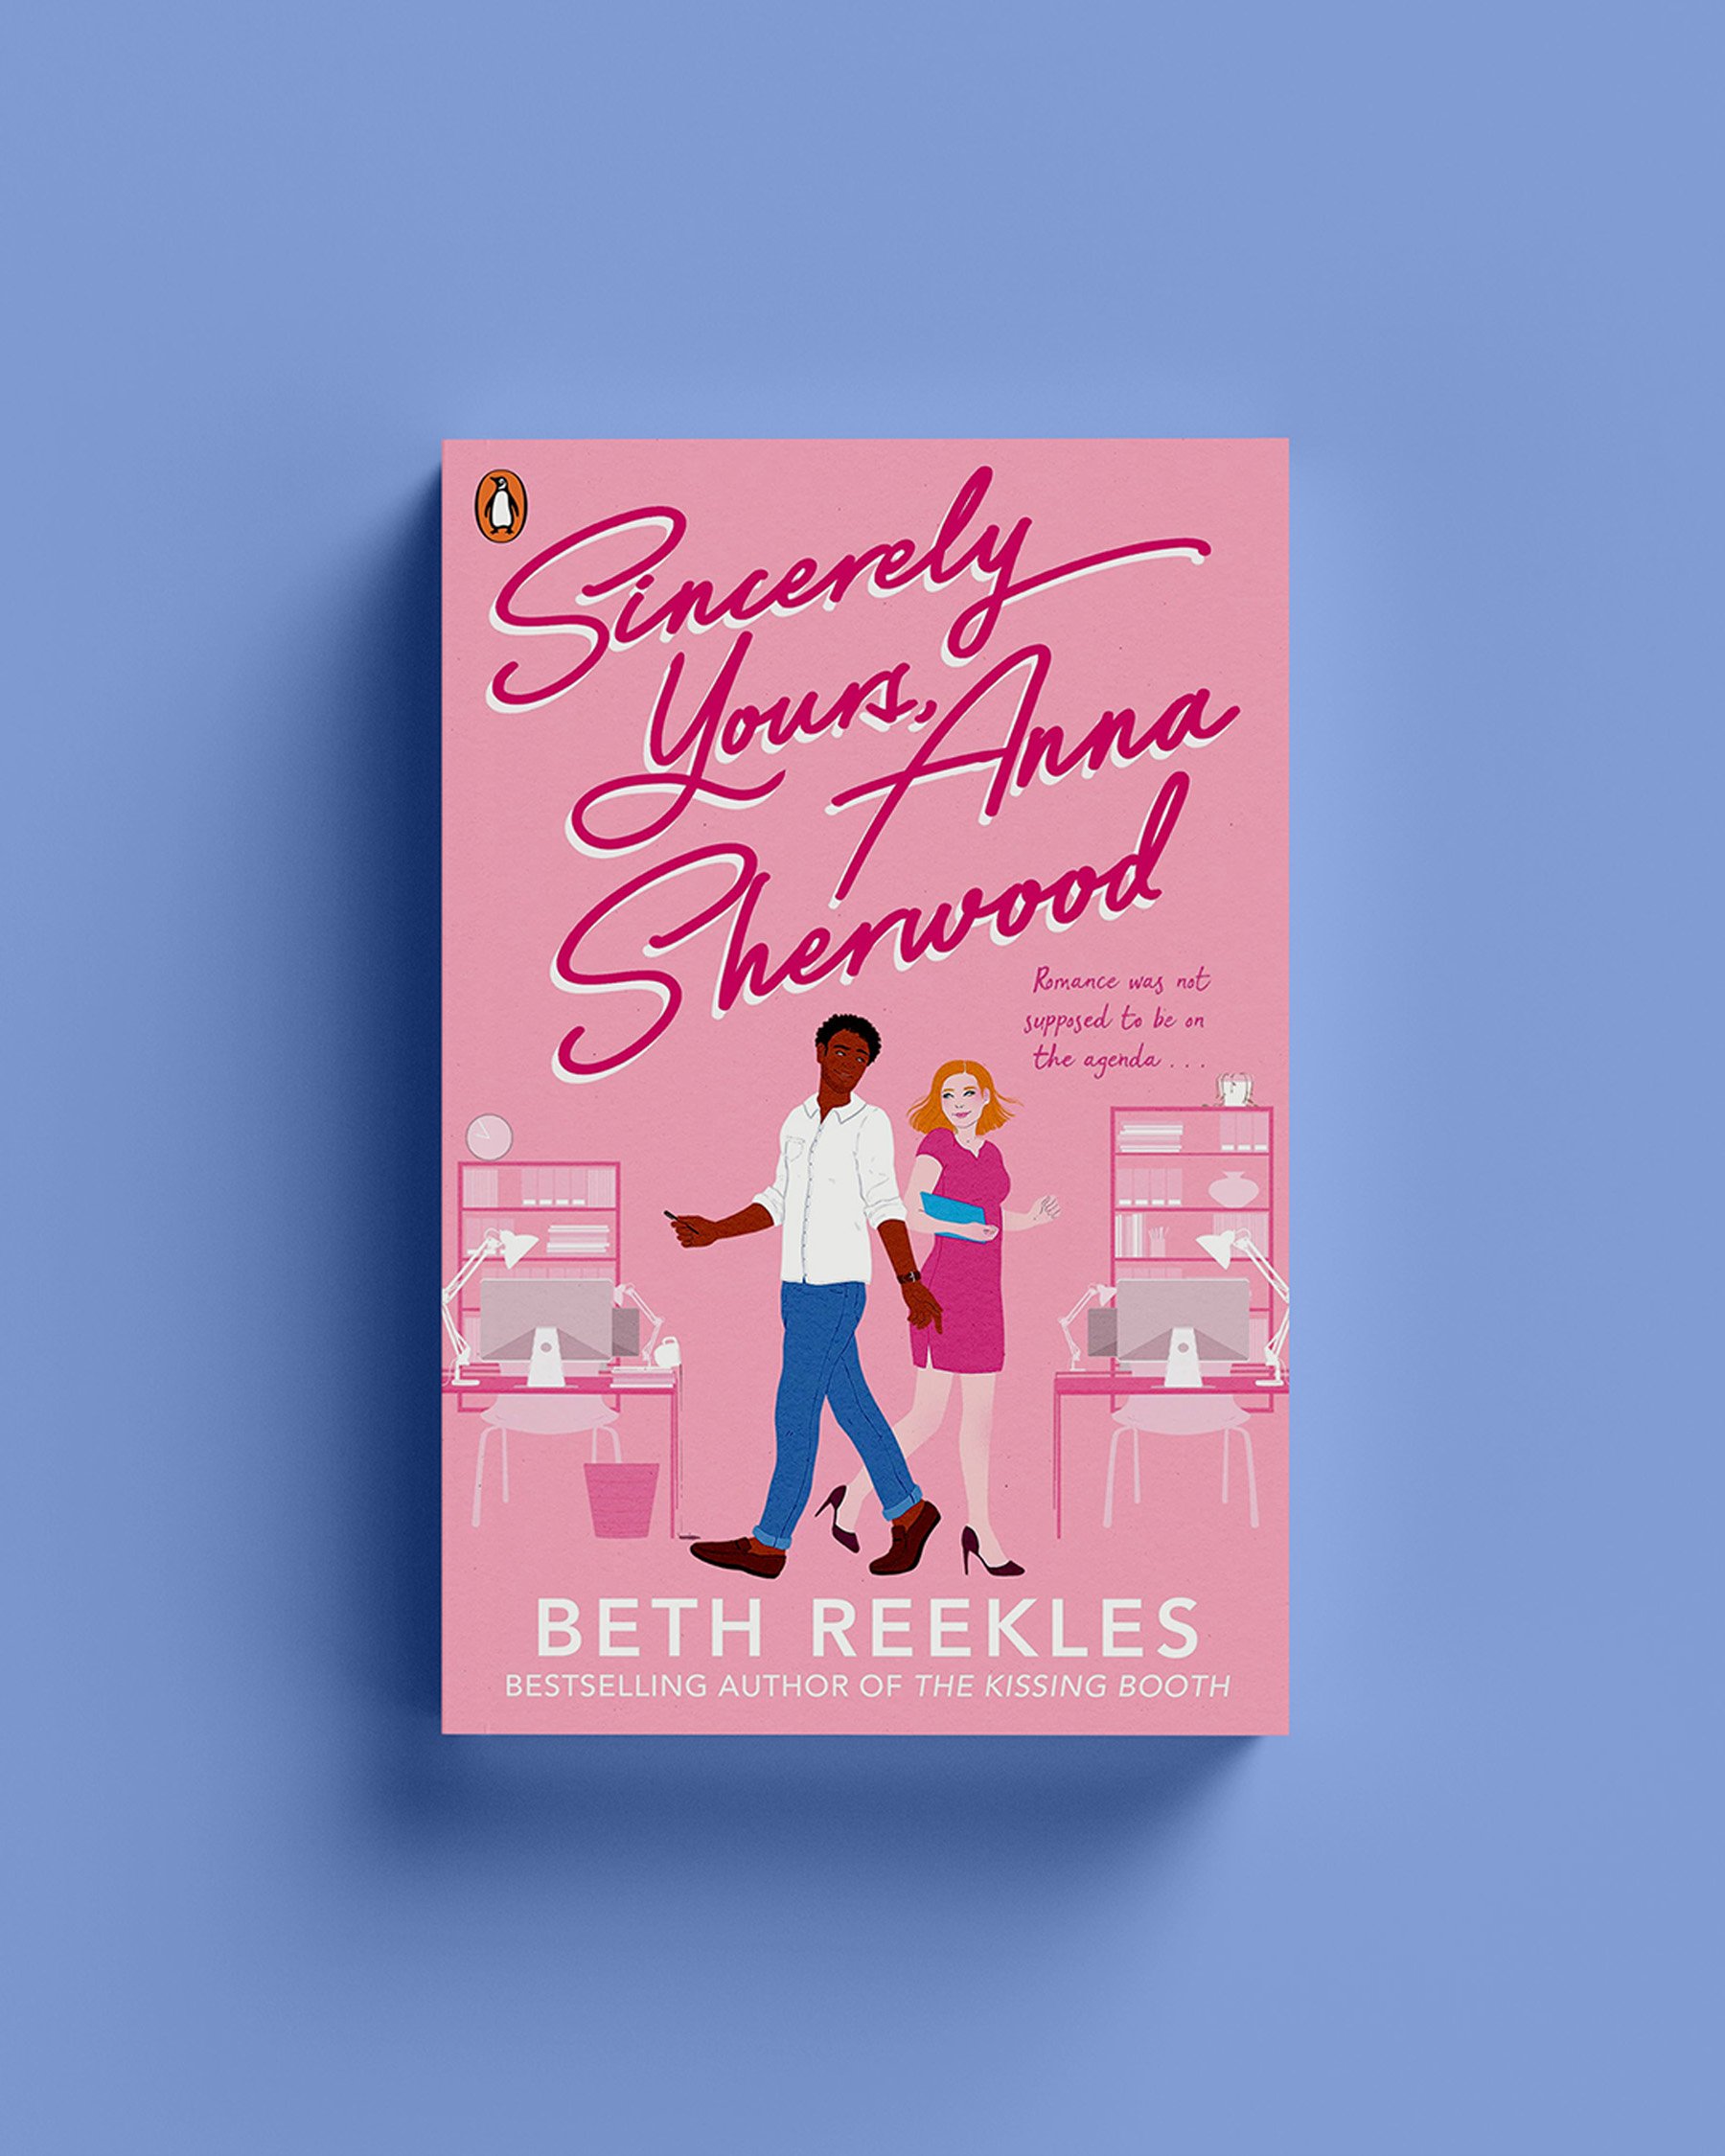 Cover for "Sincerely yours, Anna Sherwood" by Beth Reekles